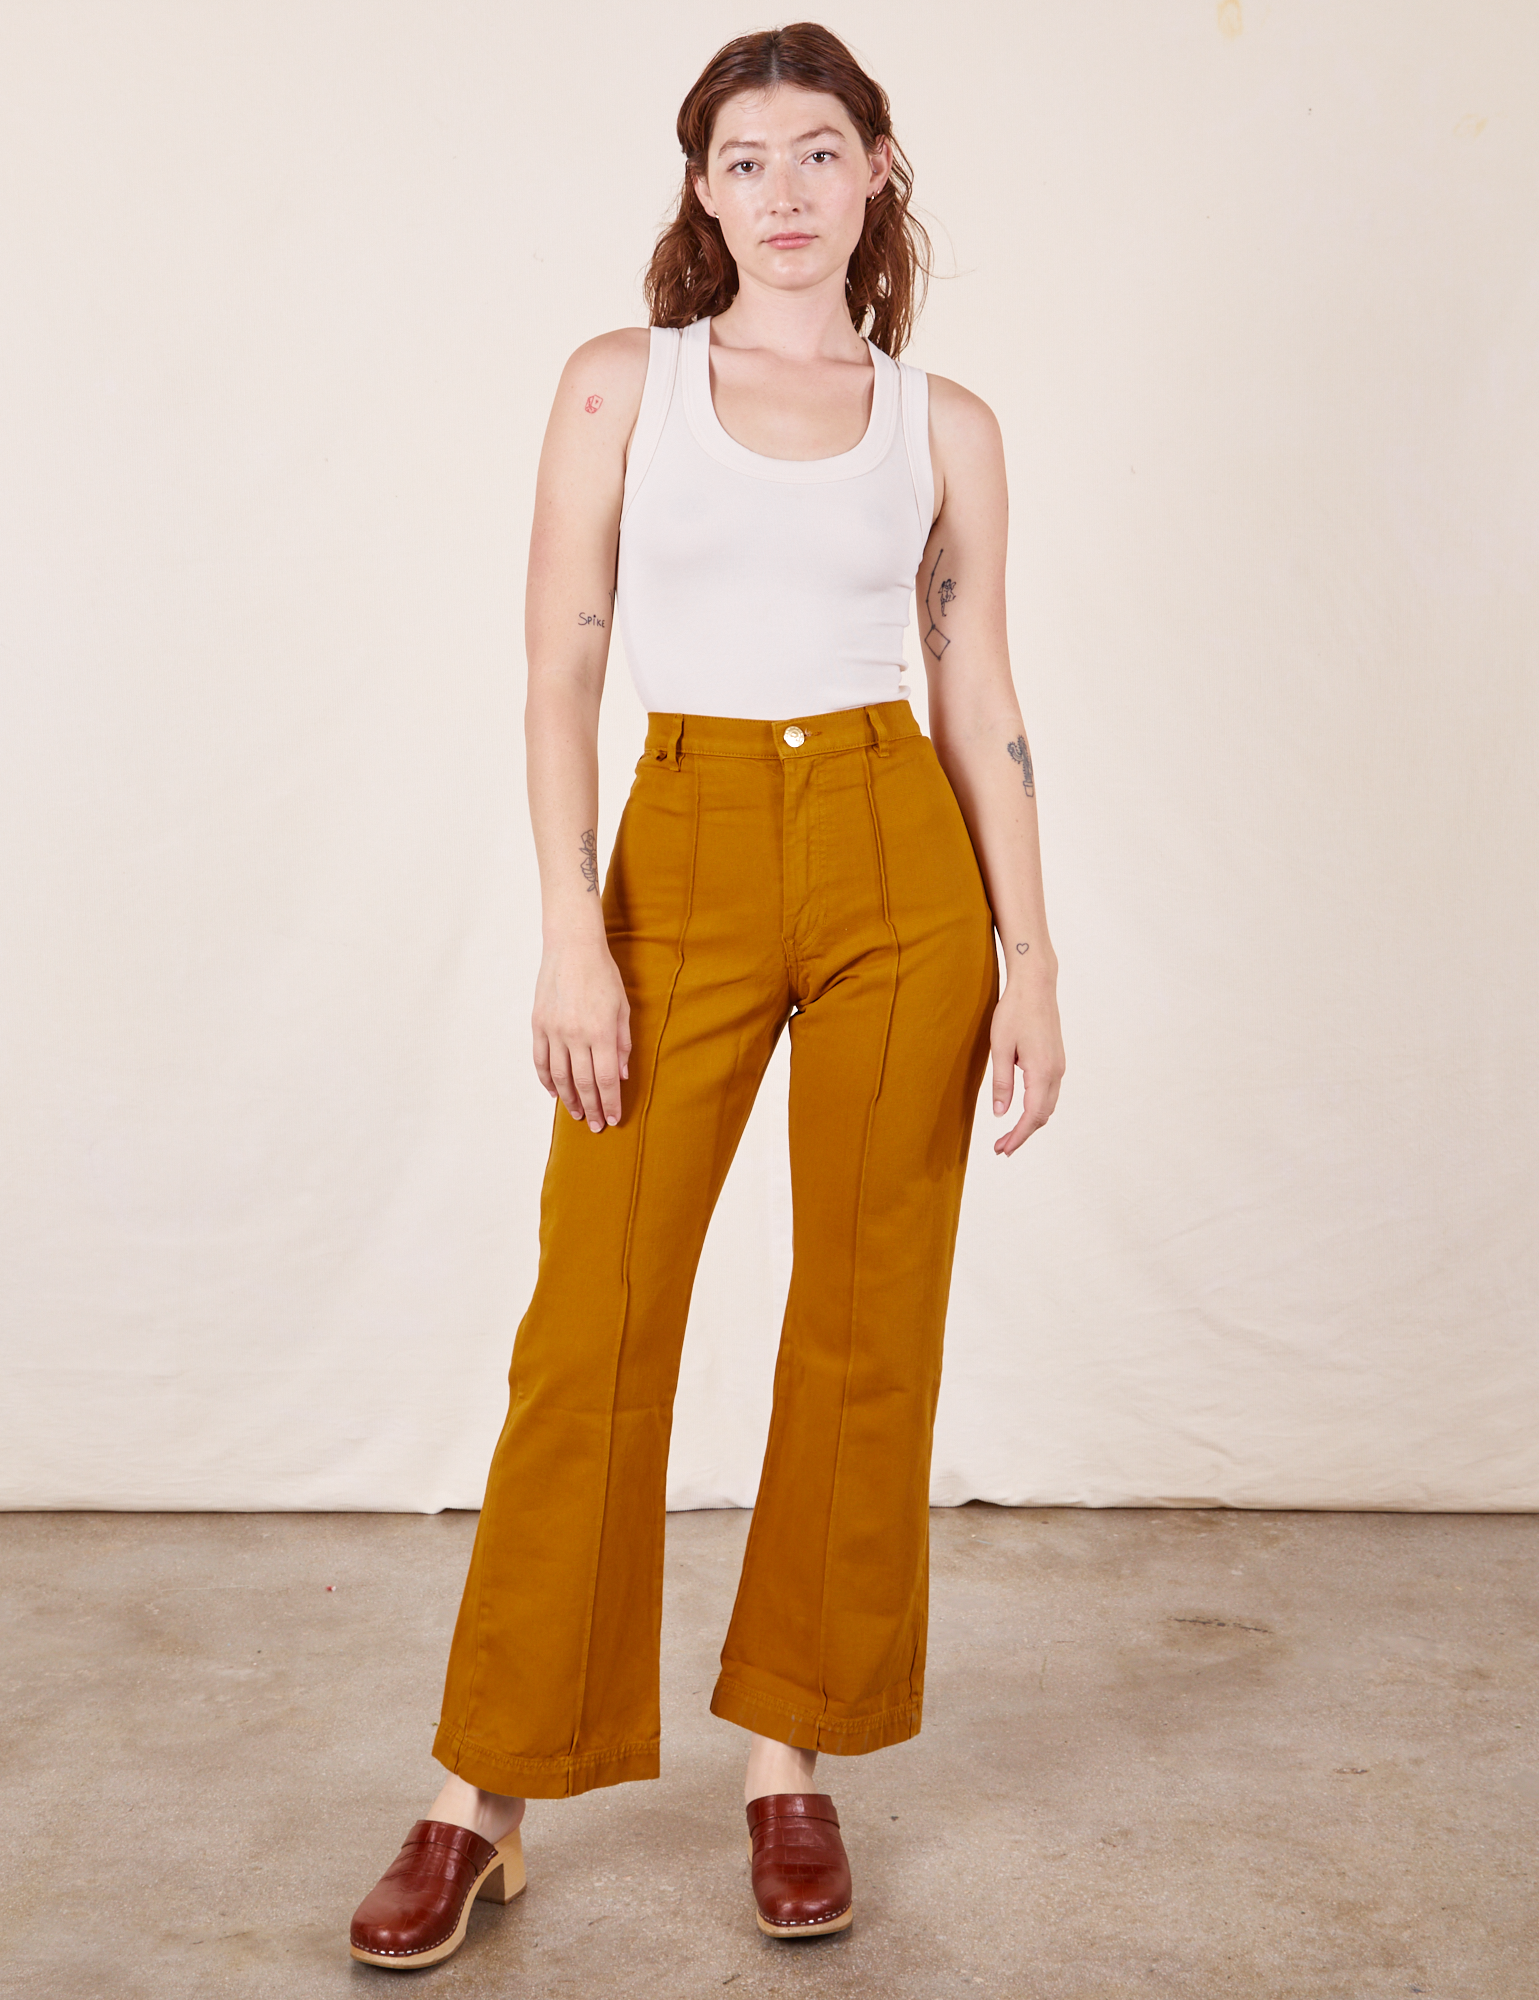 Alex is 5'8" and wearing XS Western Pants in Spicy Mustard paired with vintage off-white Tank Top